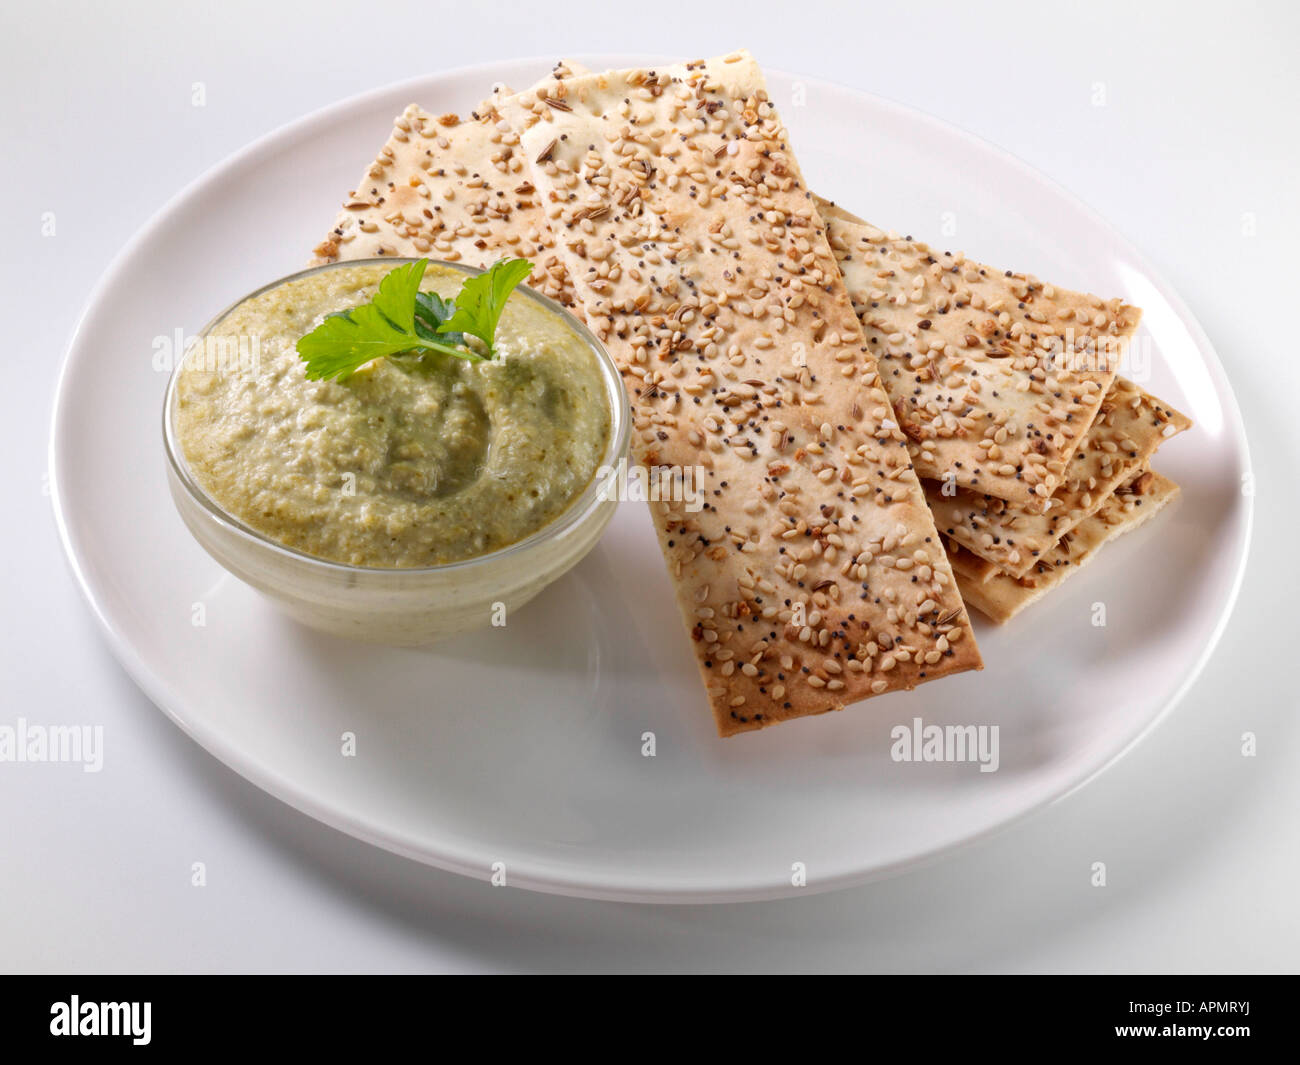 Hummus crackers healthy diet lunch editorial food Stock Photo